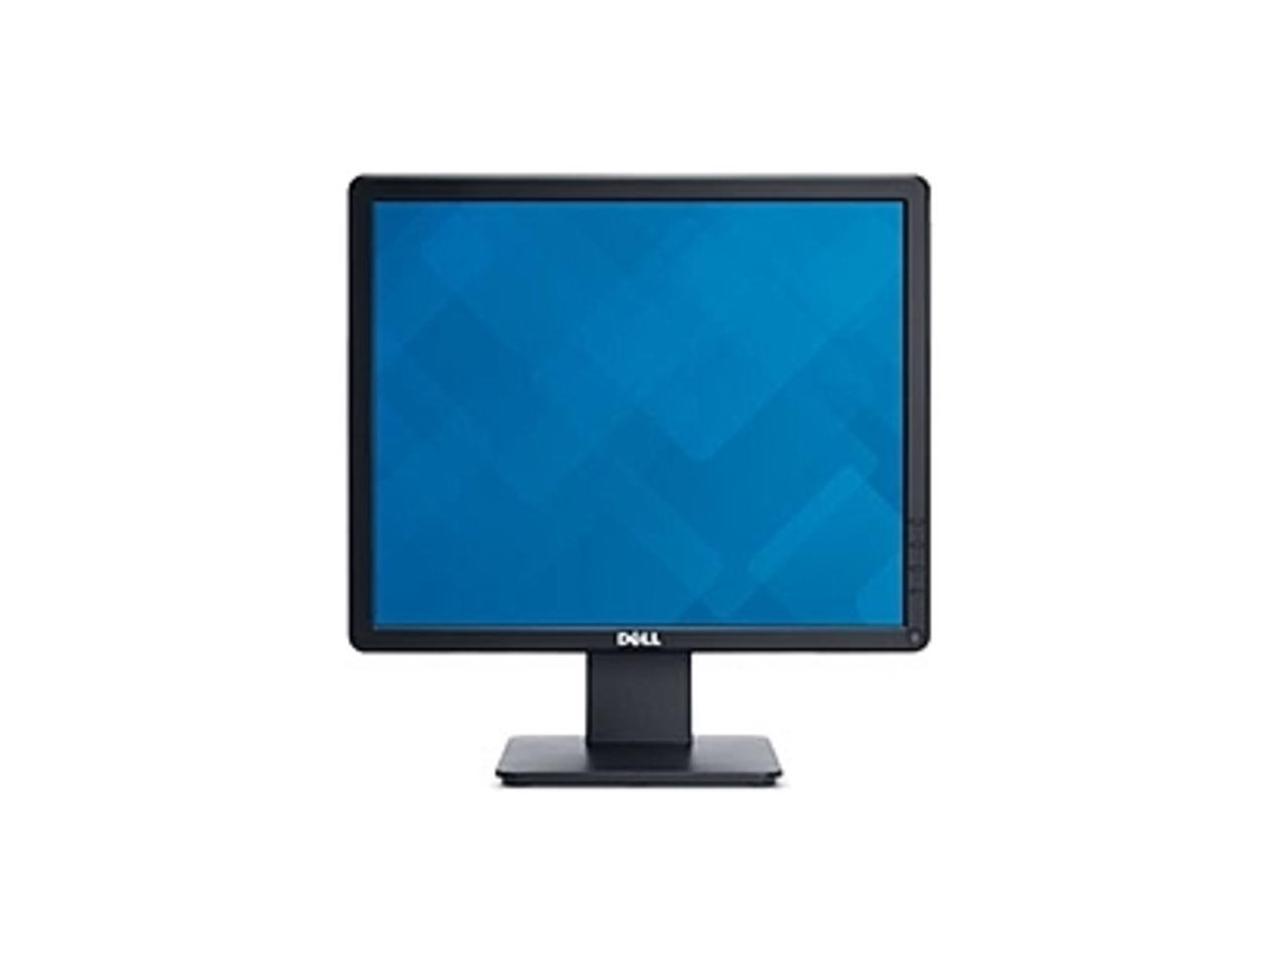 DELL E1715S 17" 1280x1024 LED-Backlit LCD Display Monitor